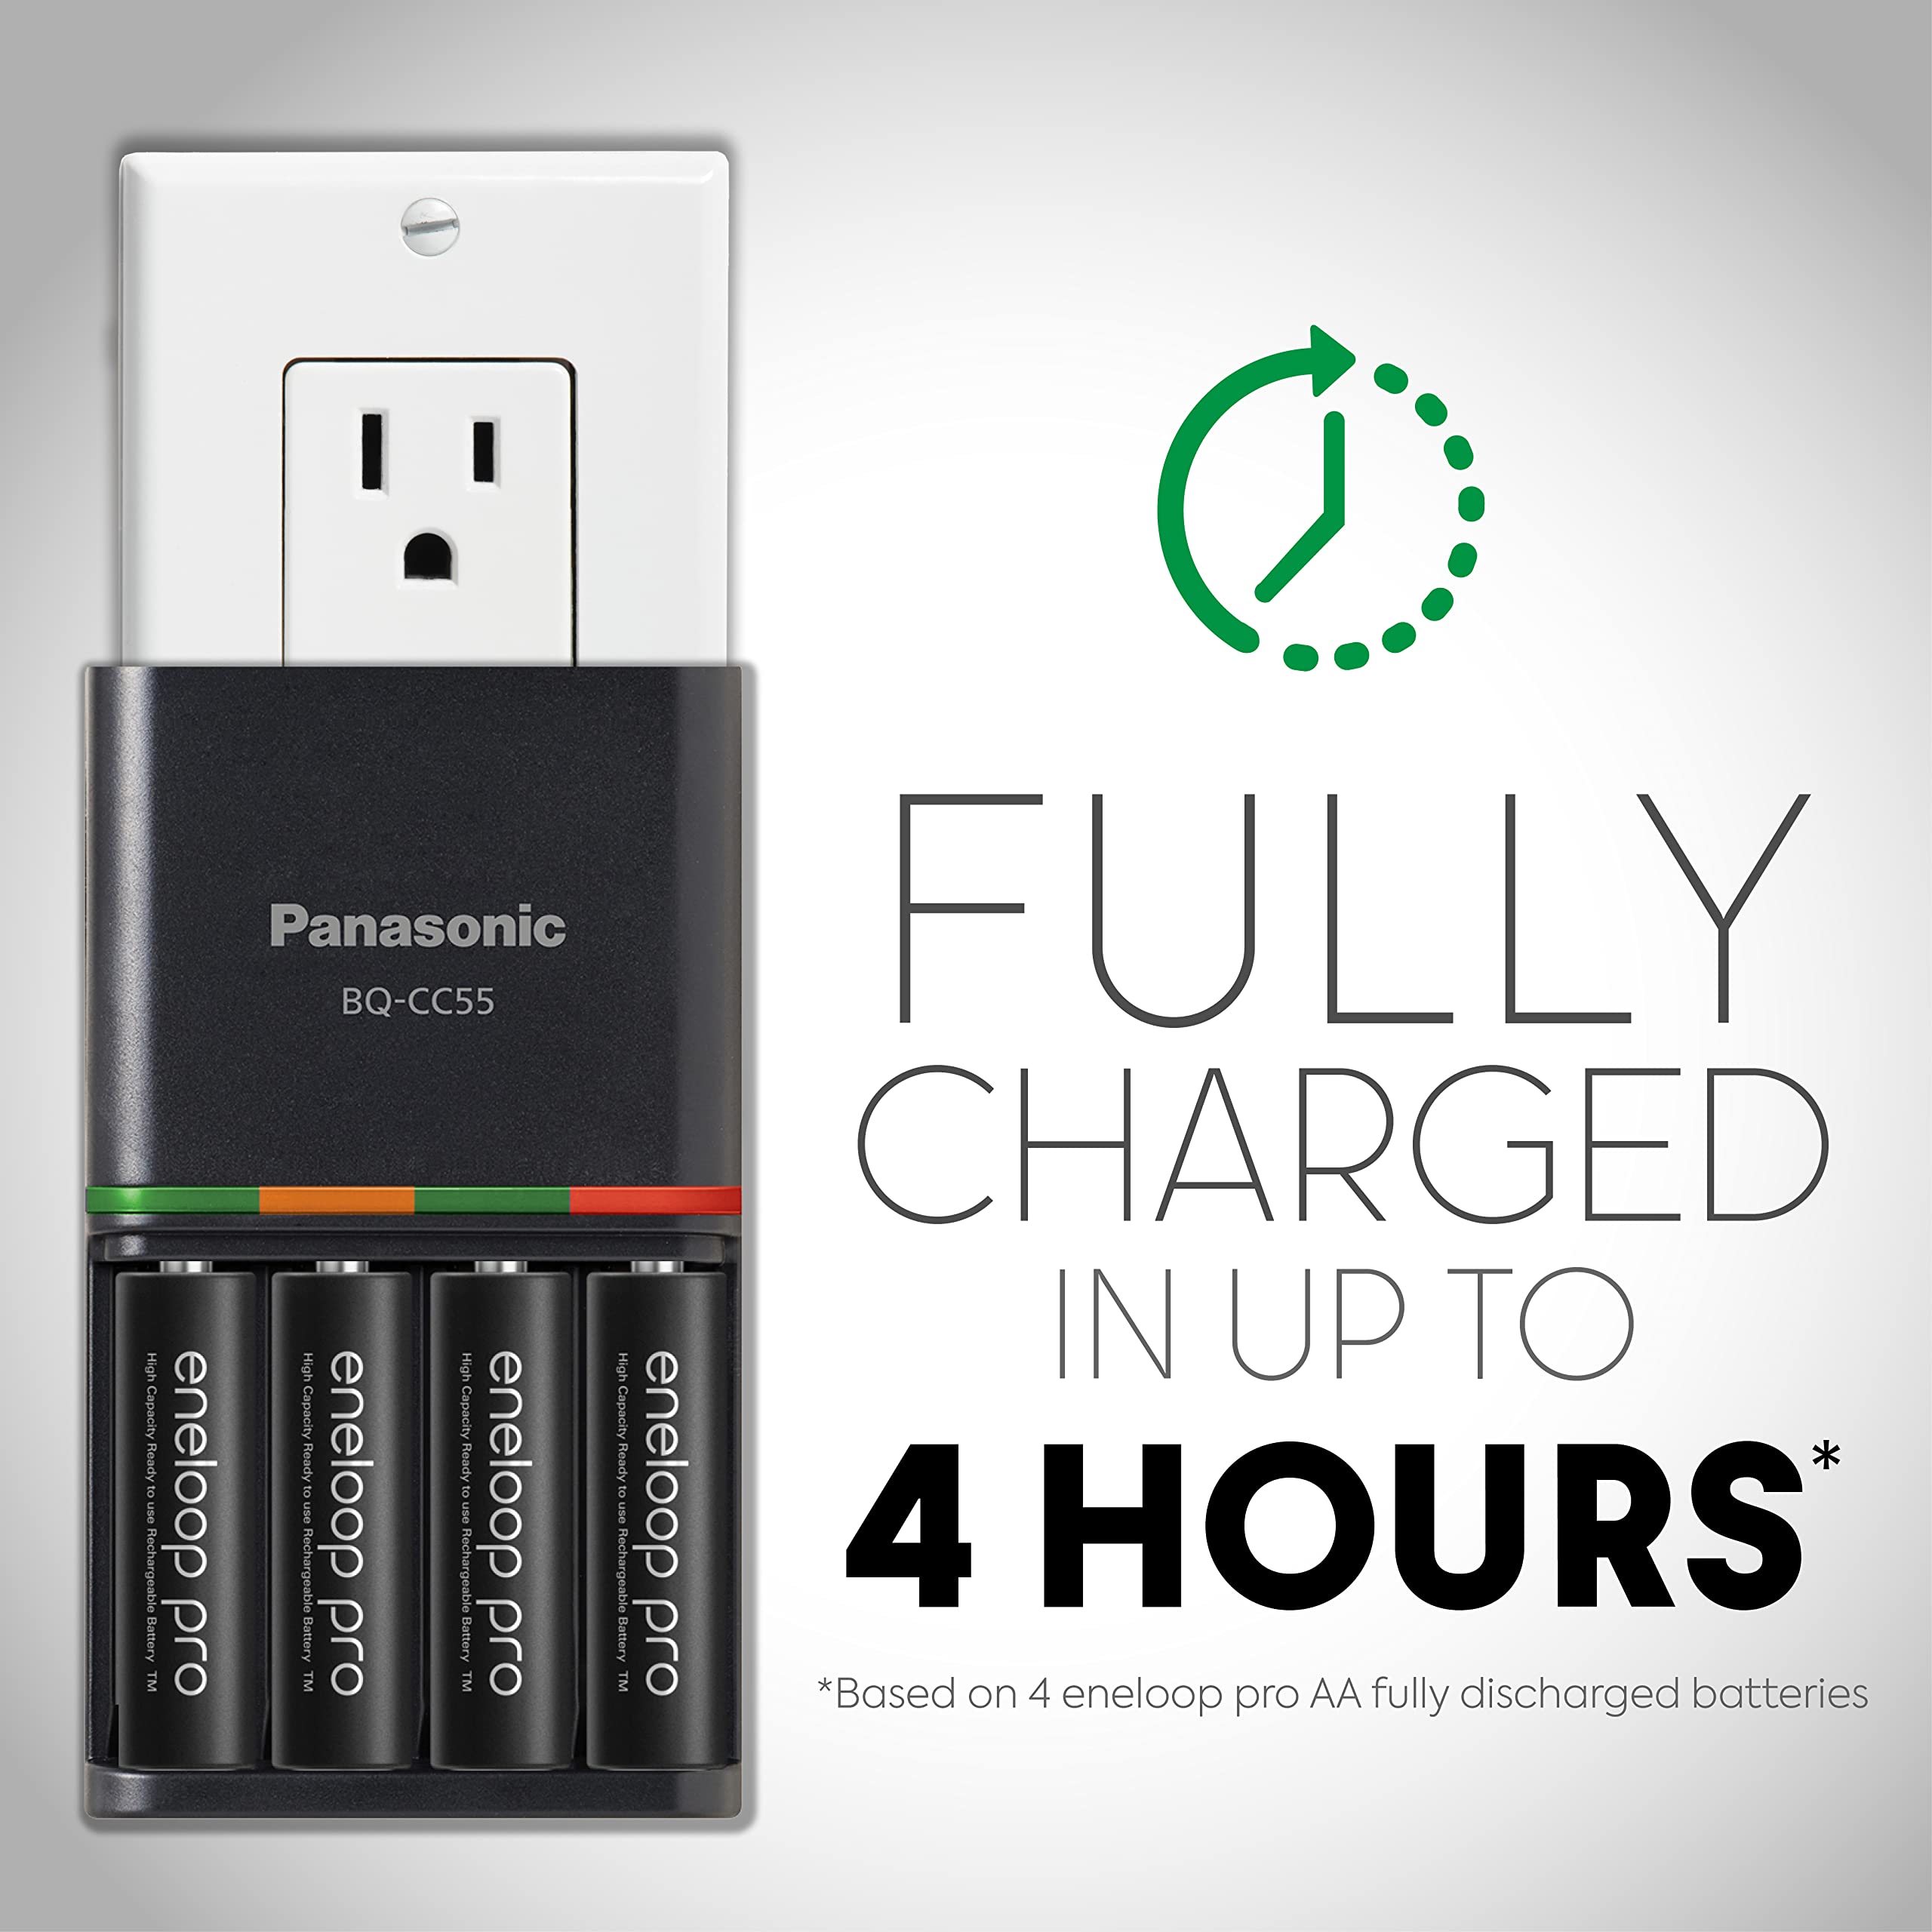 Panasonic BQ-CC55KSBHA Advanced eneloop pro Rechargeable Battery 4 Hour Quick Charger with 4 LED Charge Indicator Lights, Black